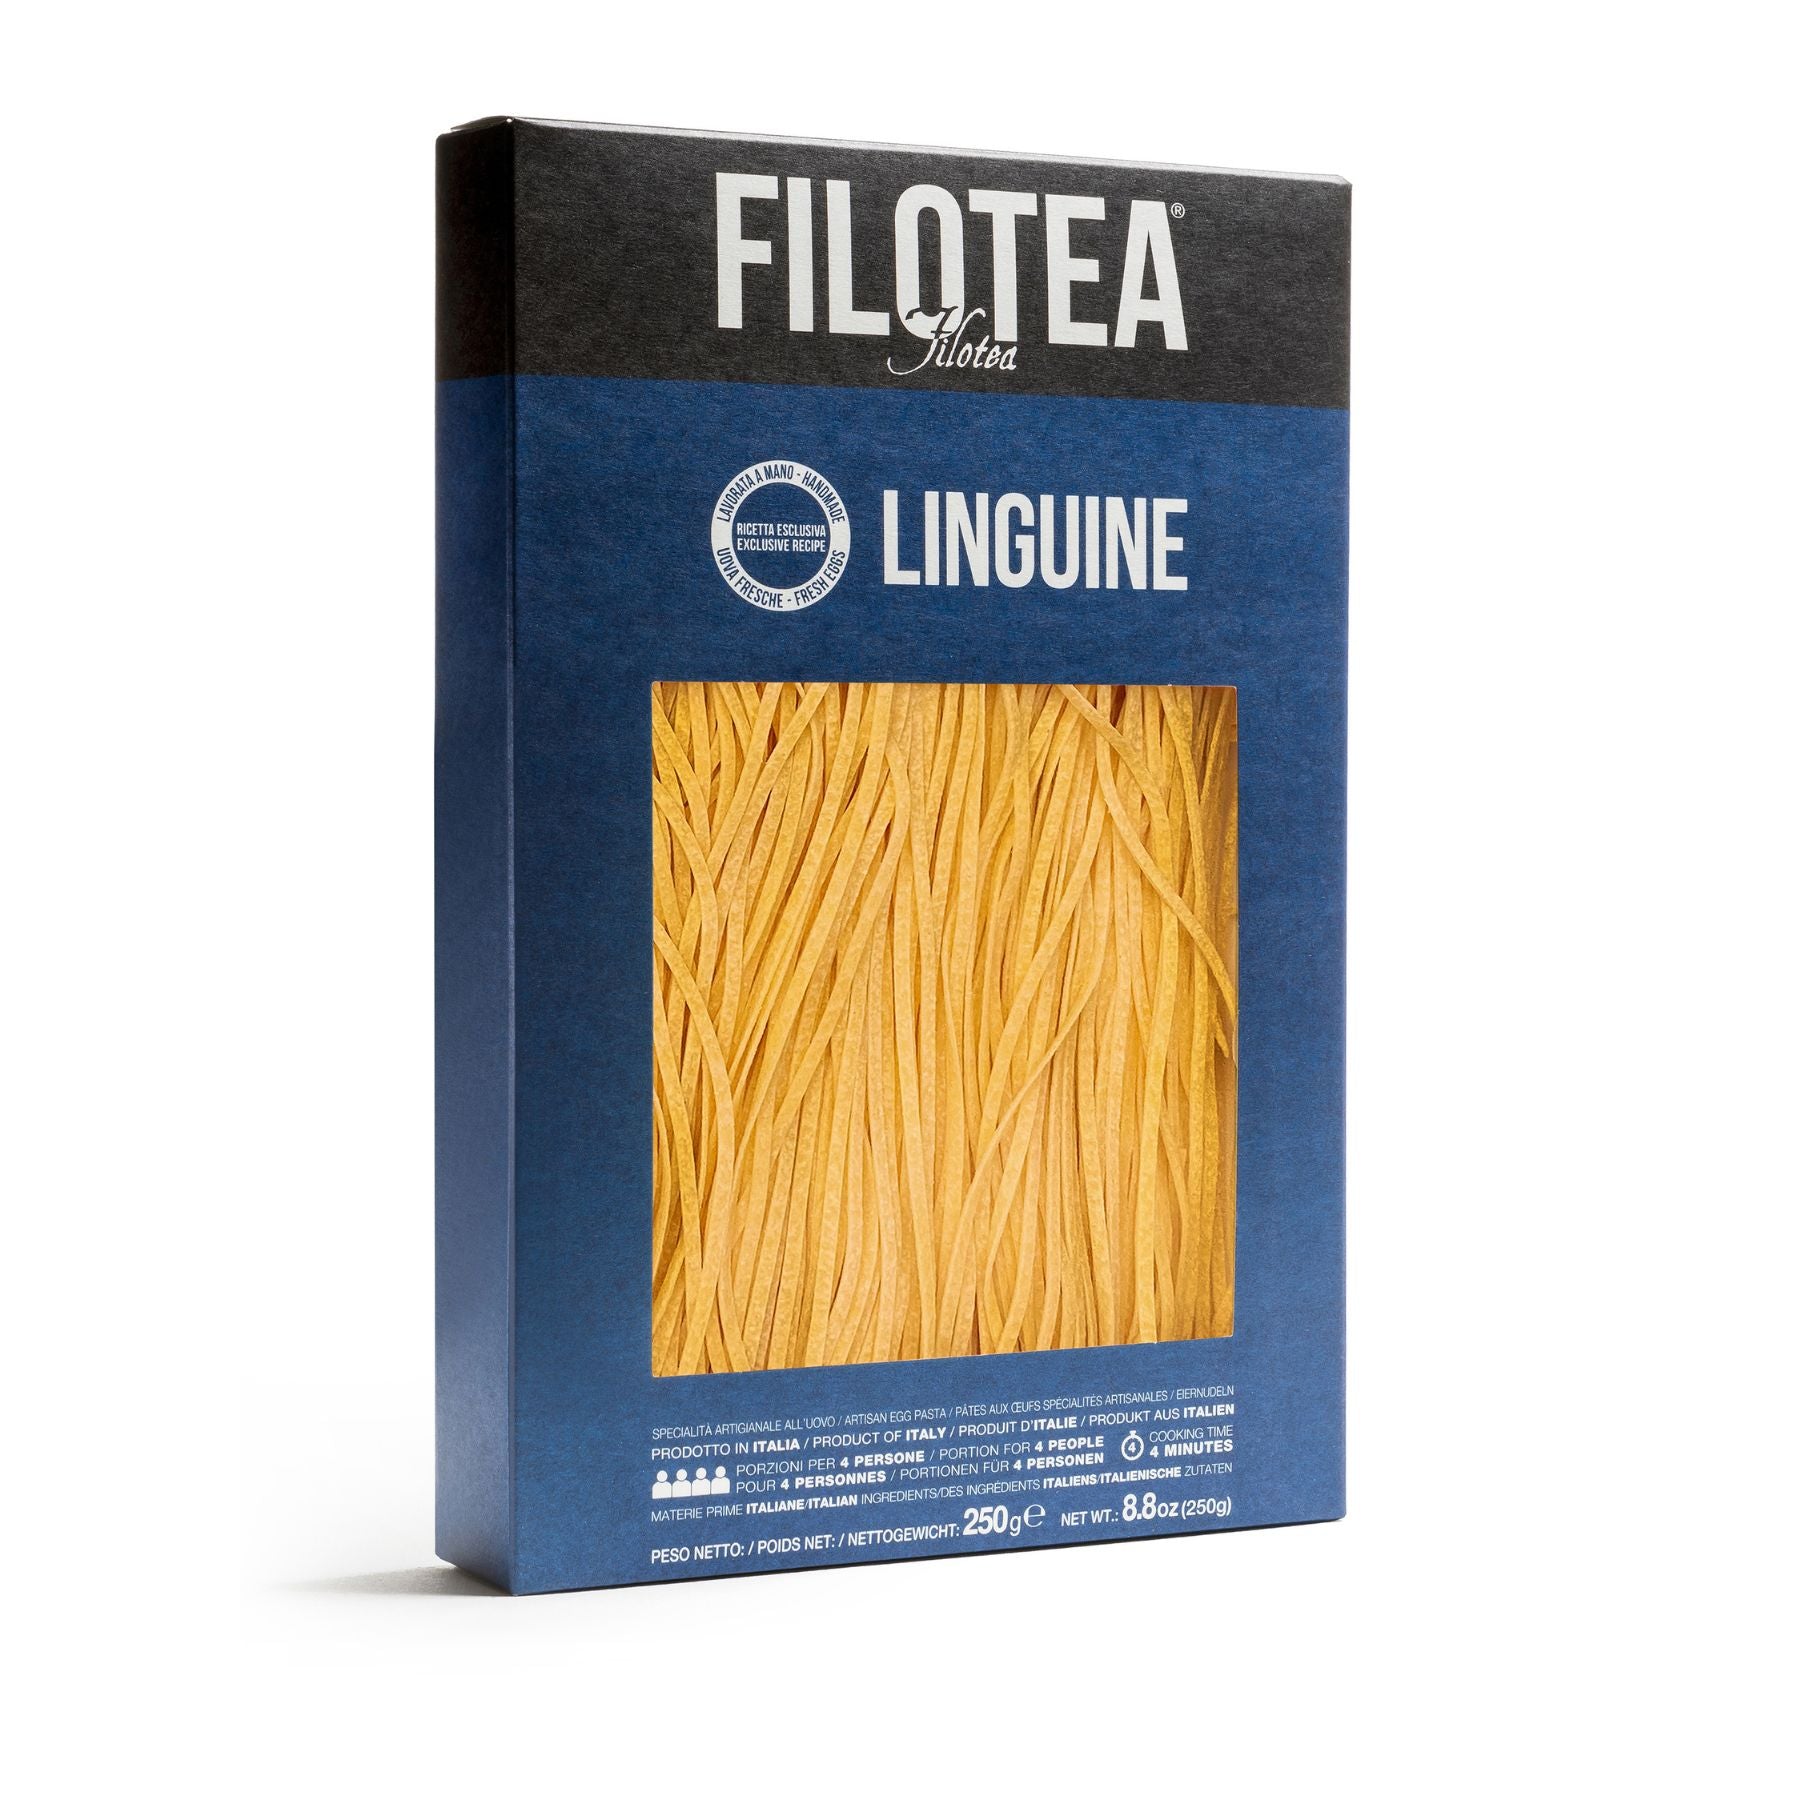 Filotea Linguine Artisan Egg Pasta 250g | Imported and distributed in the UK by Just Gourmet Foods